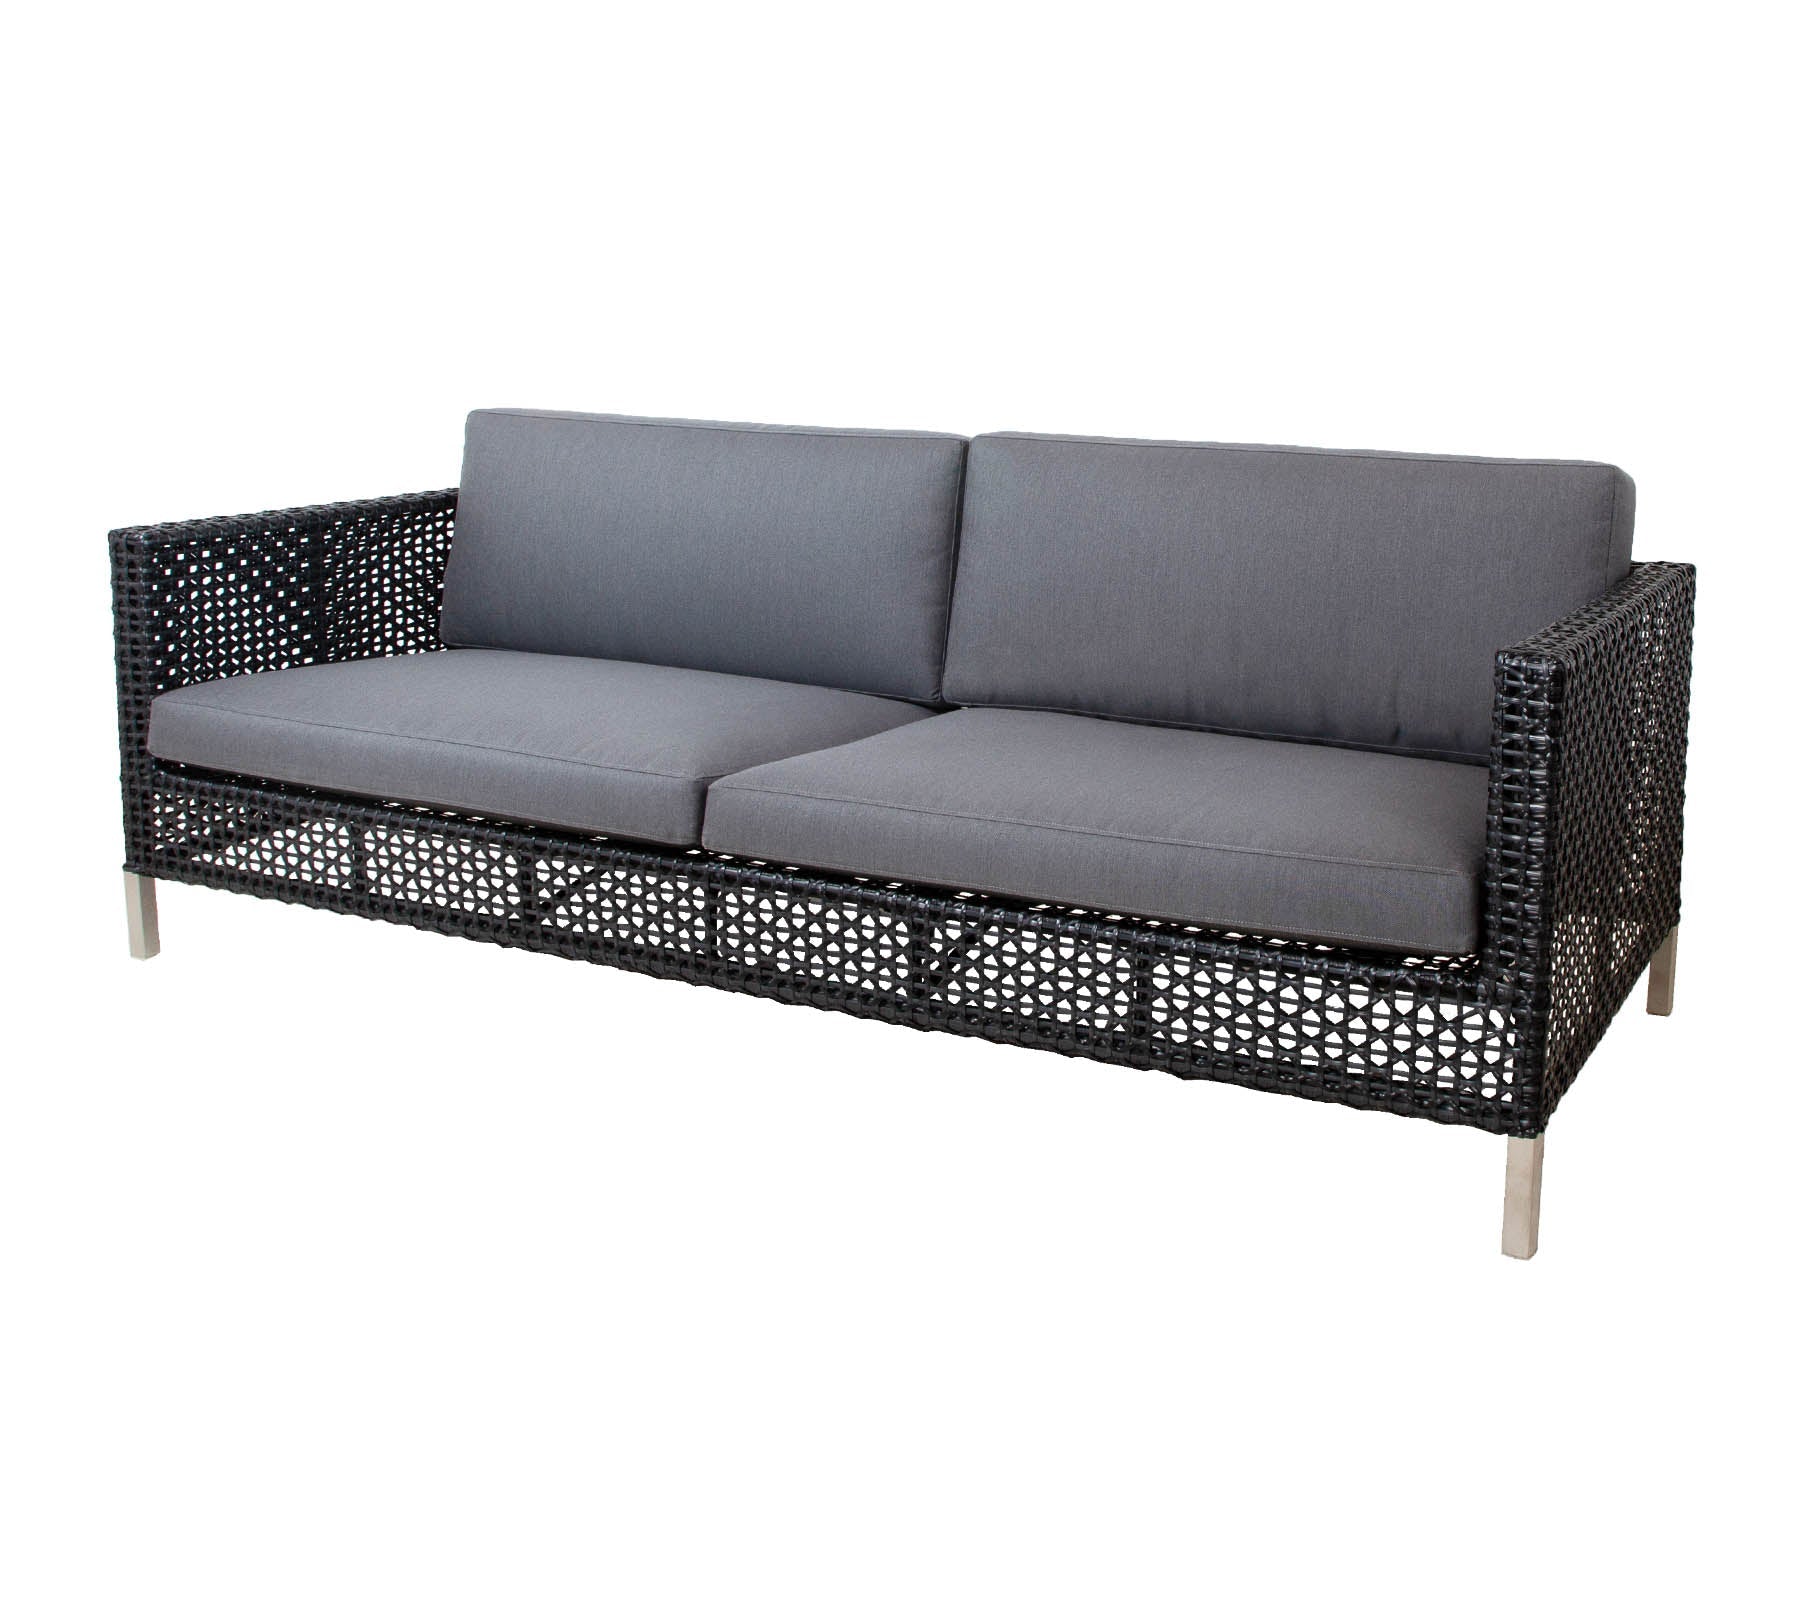 Cane-line Connect 3-seater Sofa 5592SG